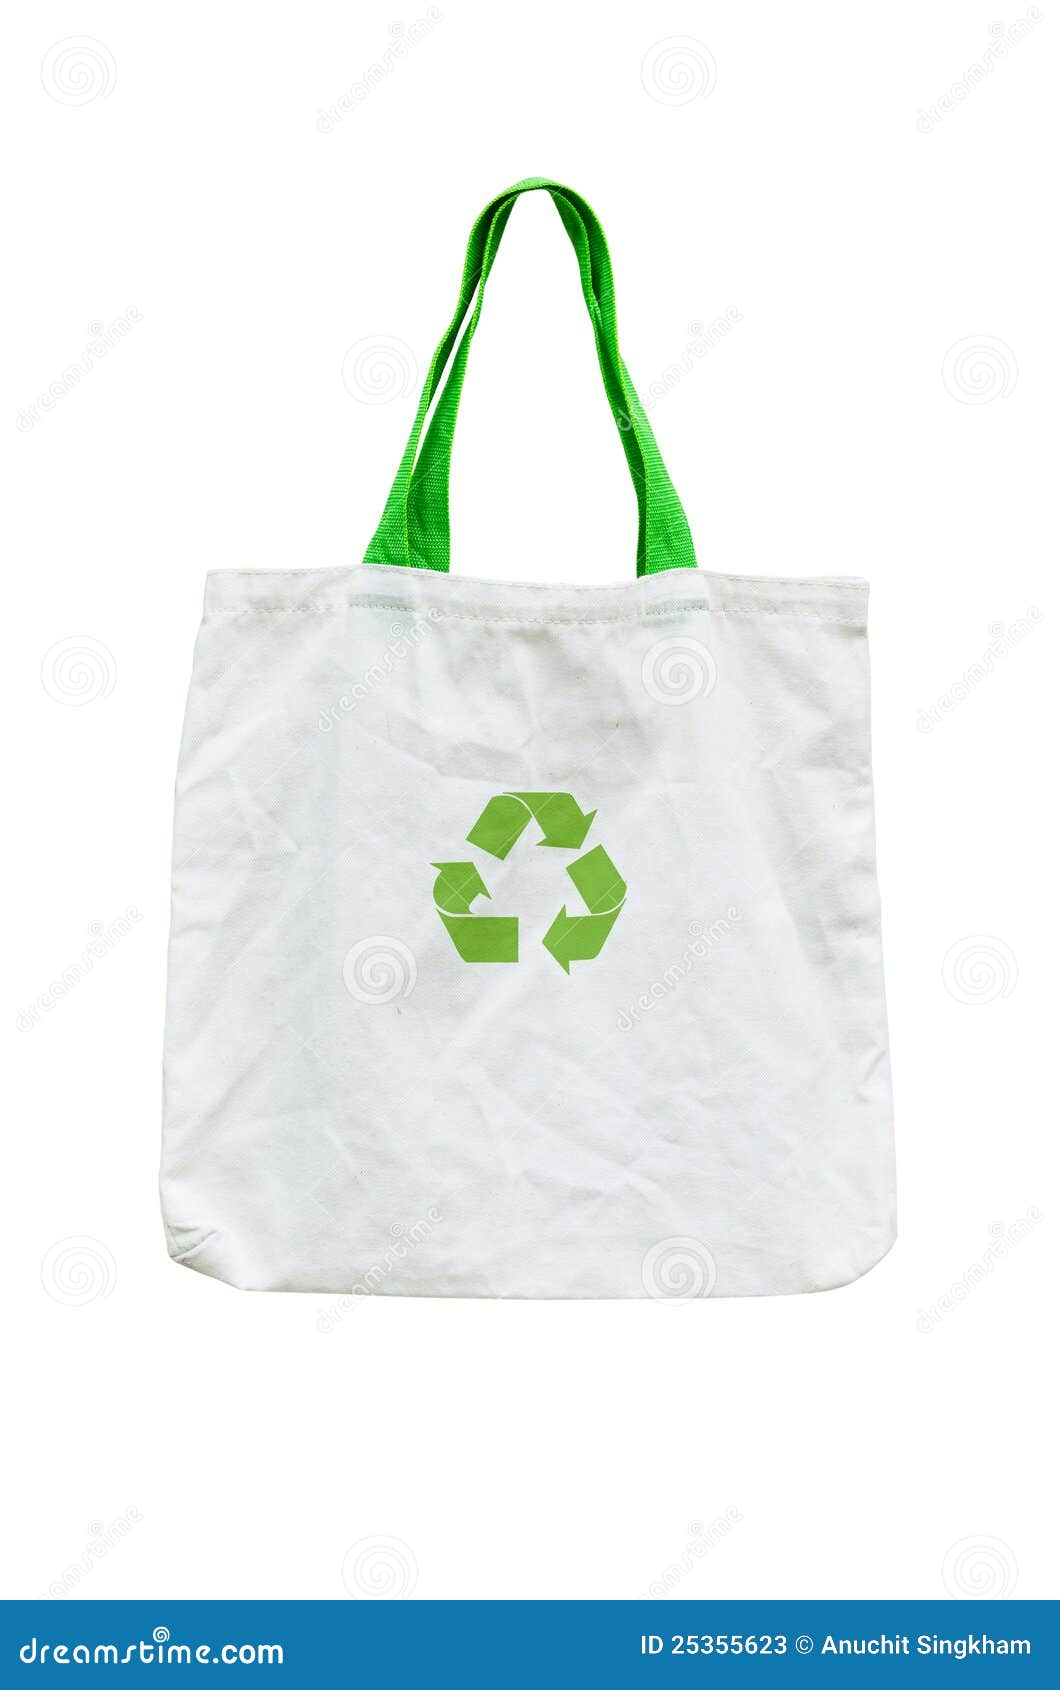 Shopping bag stock image. Image of recycling, environment - 25355623